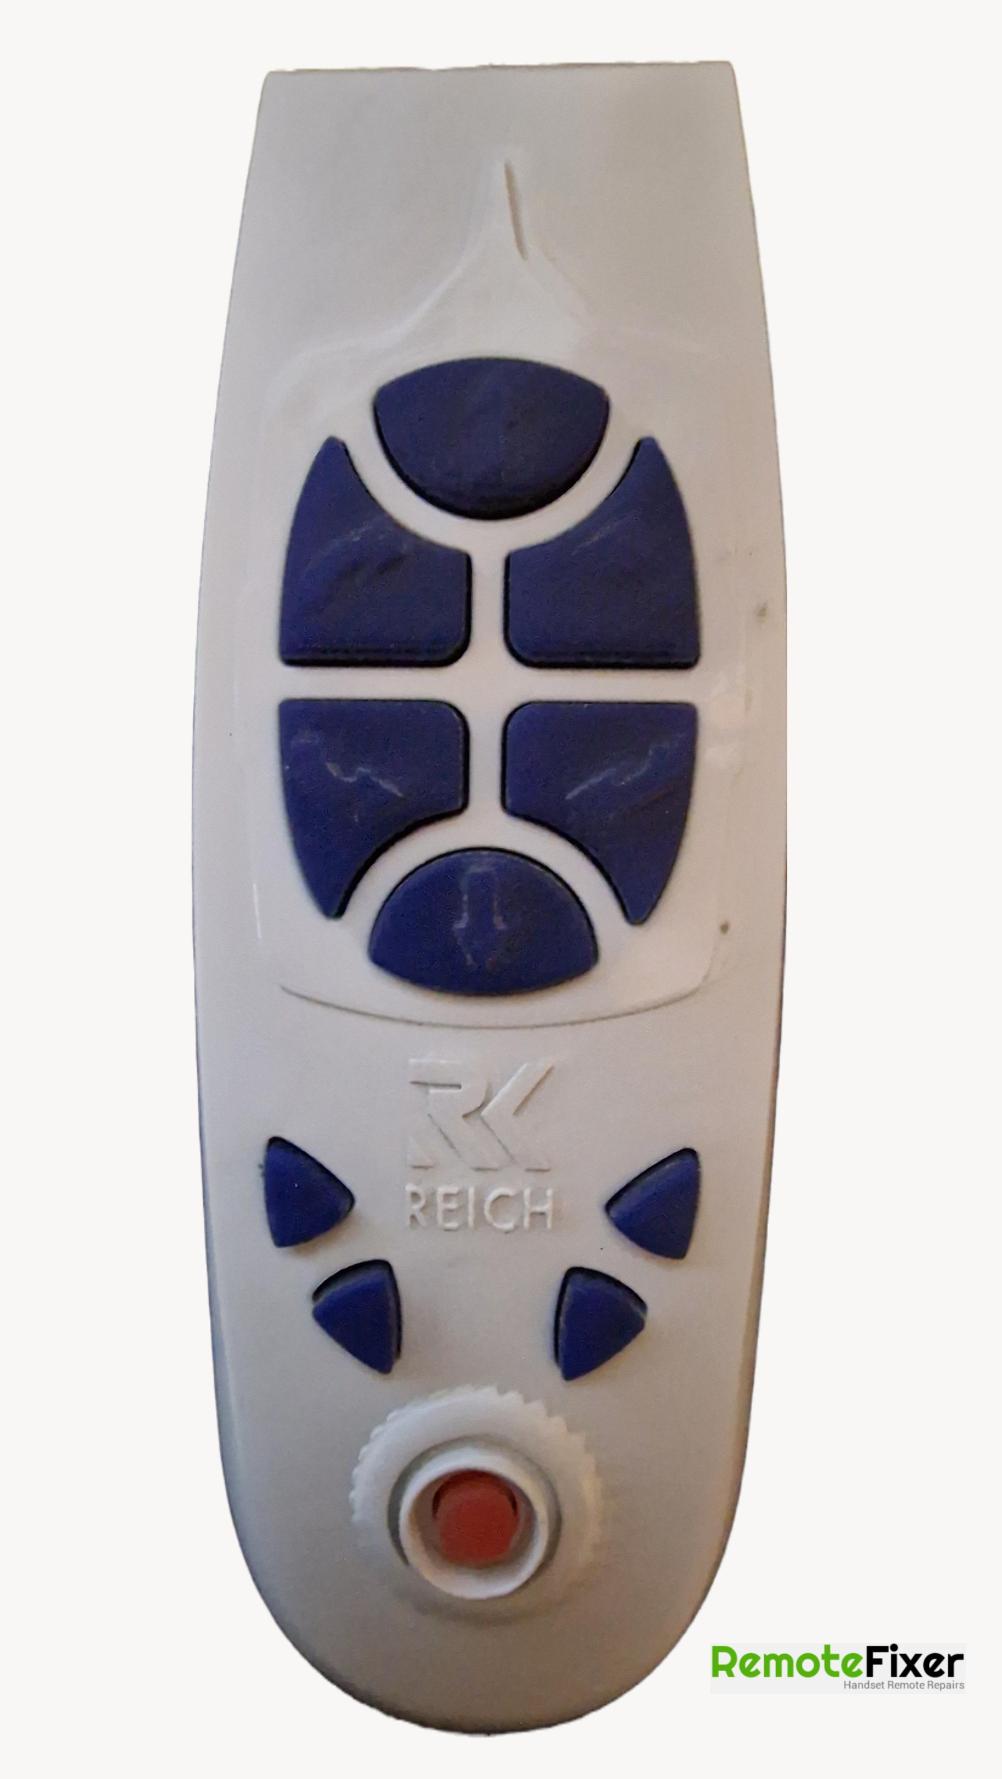 Reich   Remote Control - Front Image